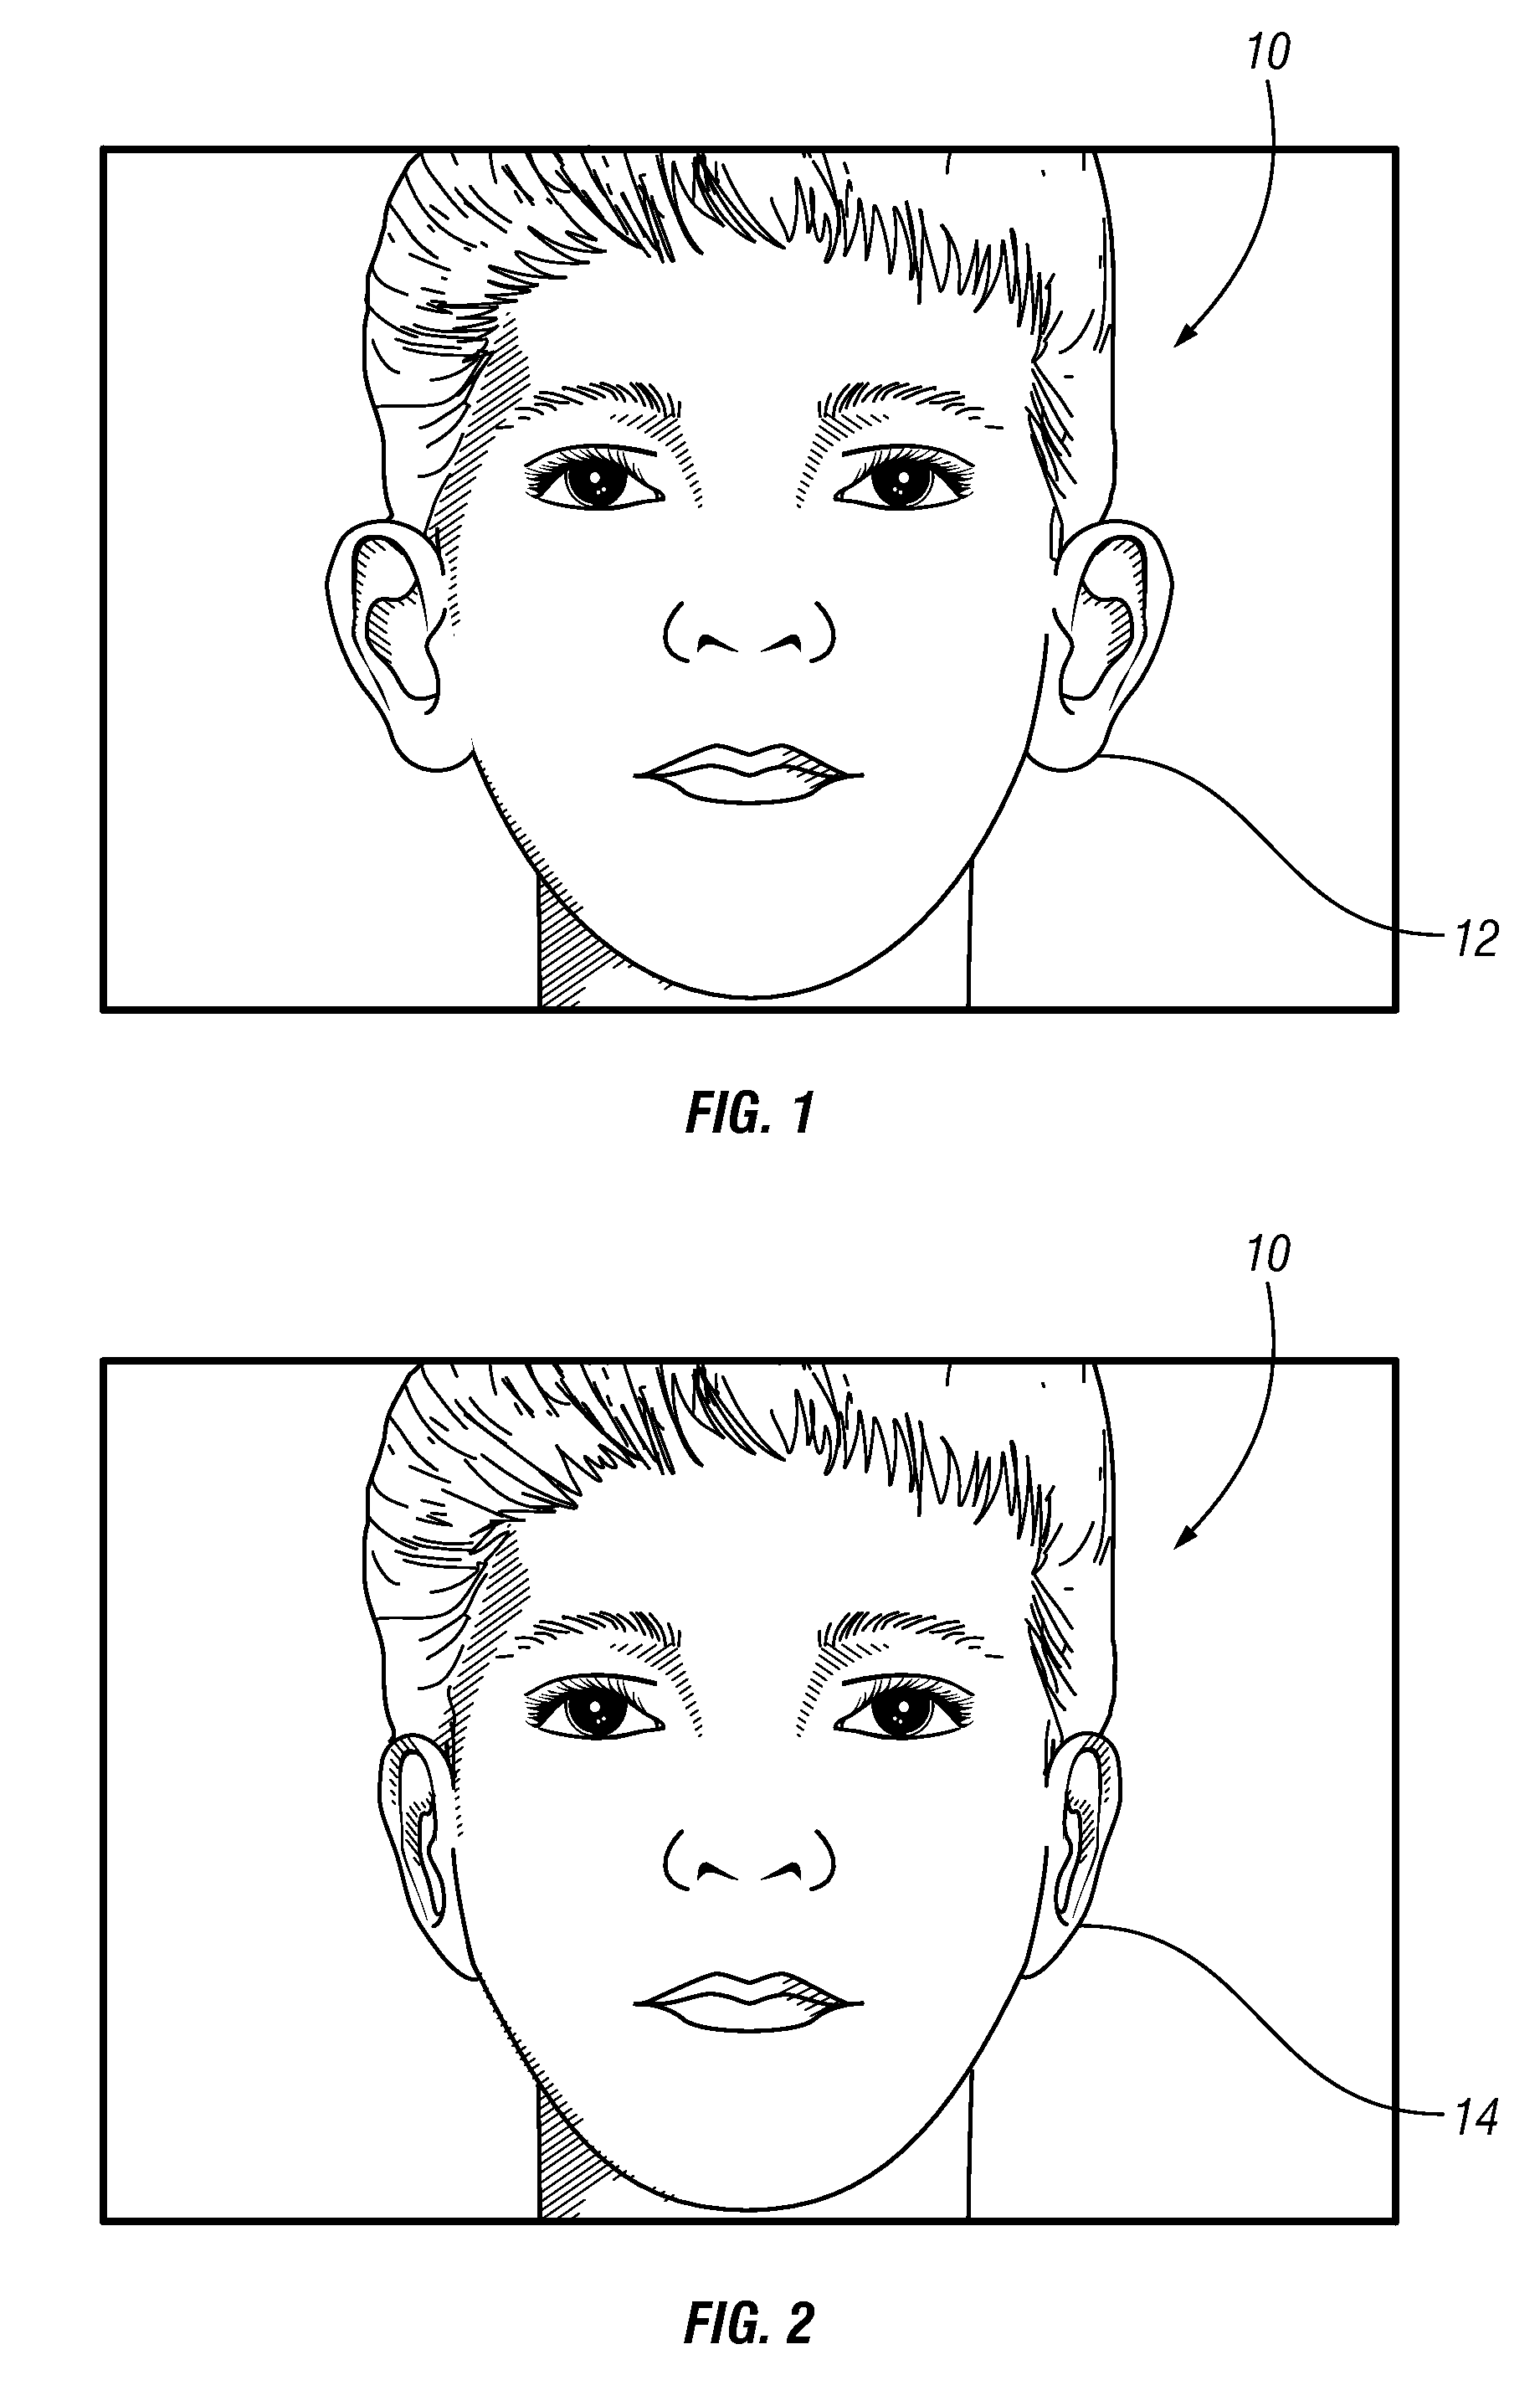 Method and means for pinning back protruding ears